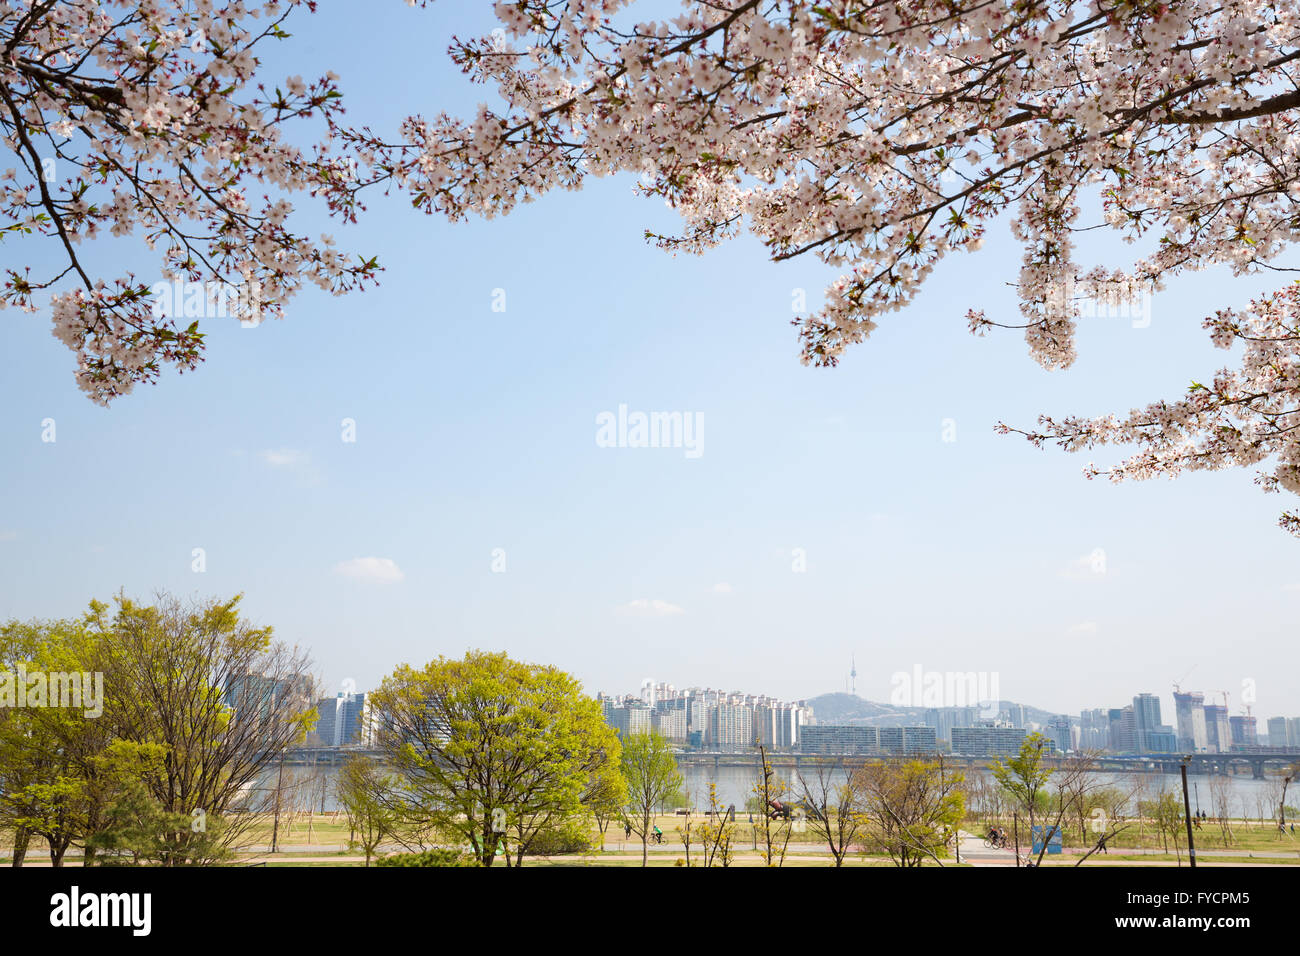 View of Hangang Park with cherry blossom, Seoul Stock Photo